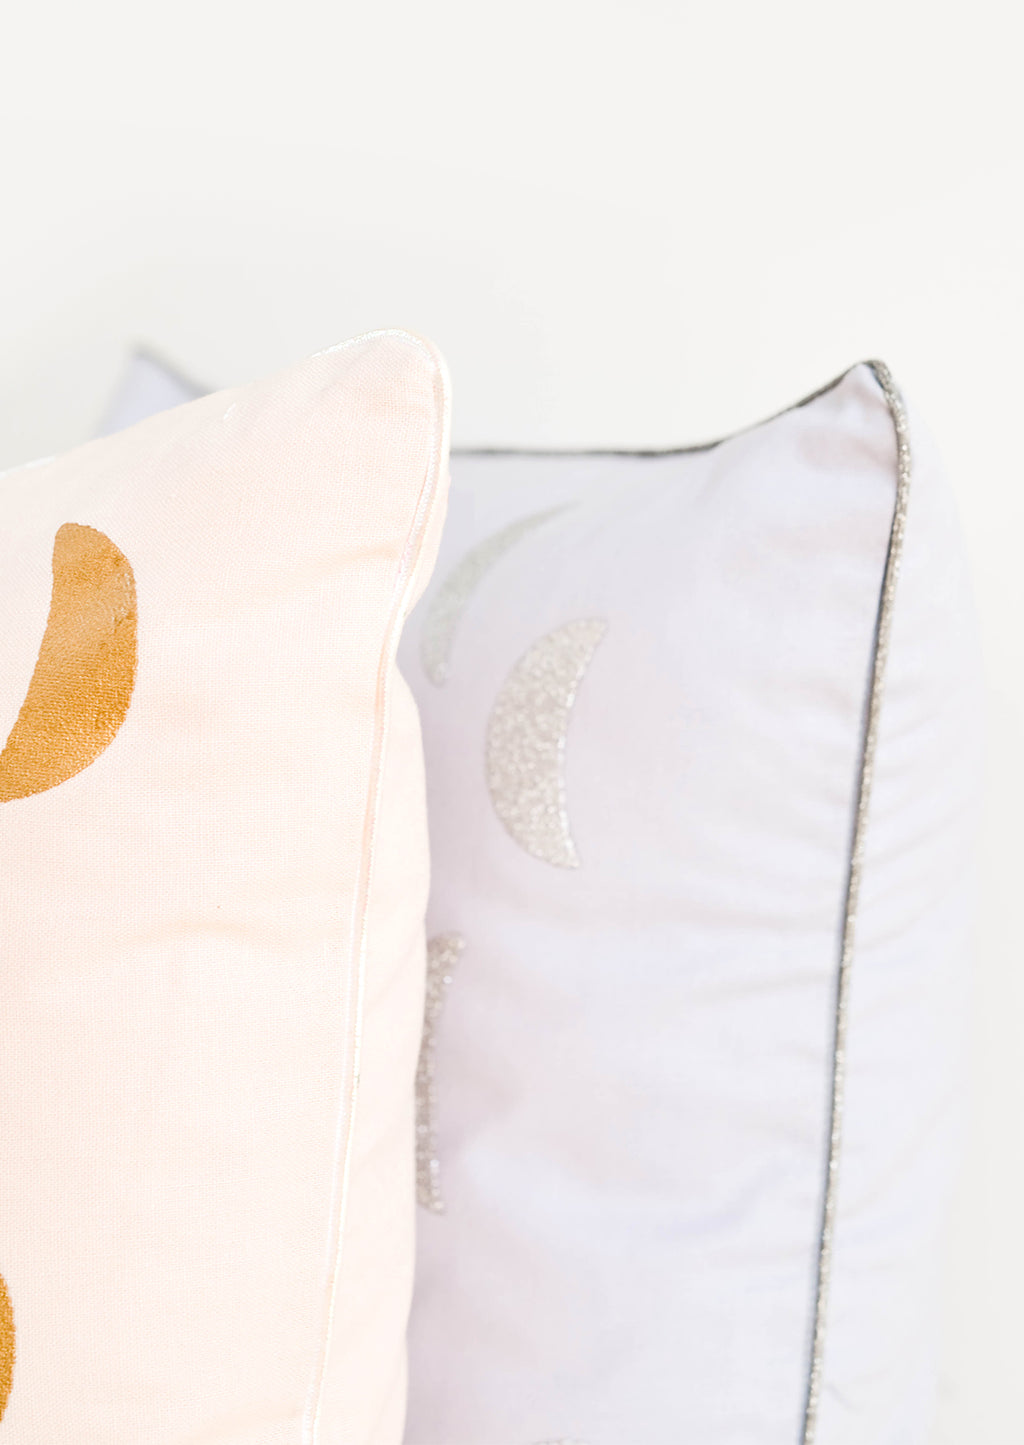 3: Detail of Moon Printed Pillows with Metallic Piped Trim Detail - LEIF